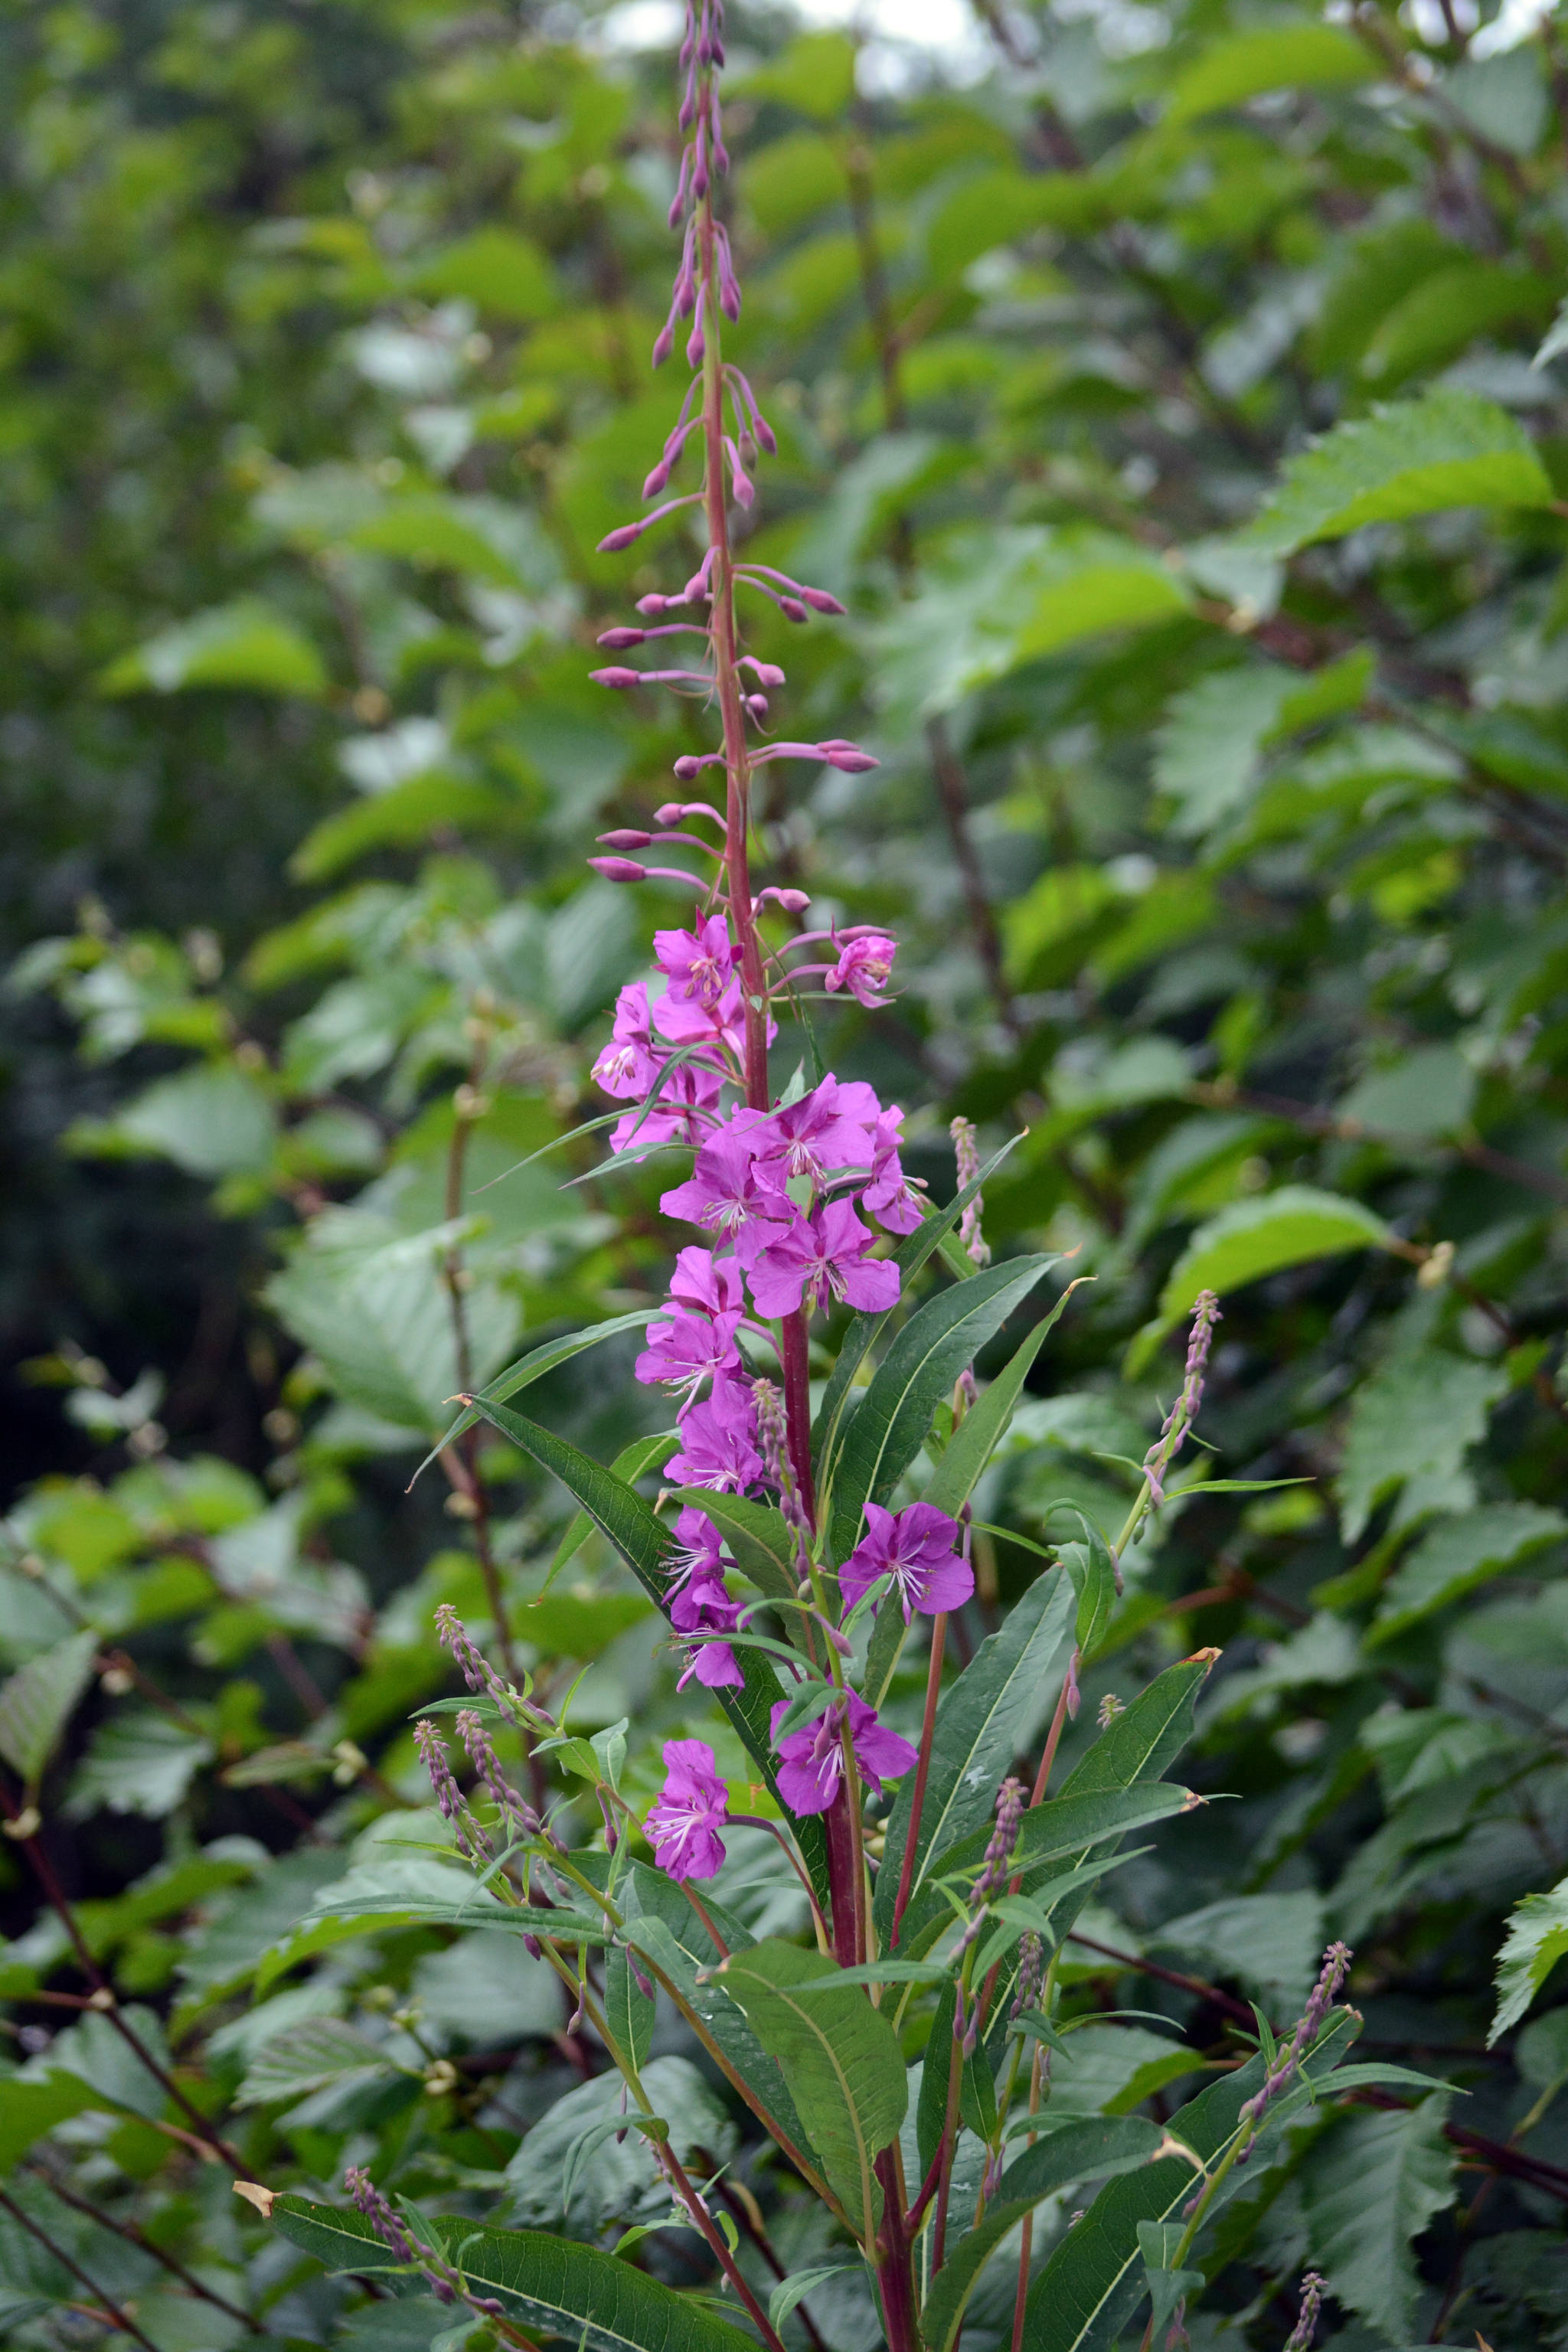 A fireweed flower blooms near the Homer News on Landings Street on Tuesday, July 24, 2018, in Homer, Alaska. Fireweed petals blossom from the bottom up, and according to Alaska folk lore, when the petals at the top have bloomed, summer is over. (Photo by Michael Armstrong/Homer News)